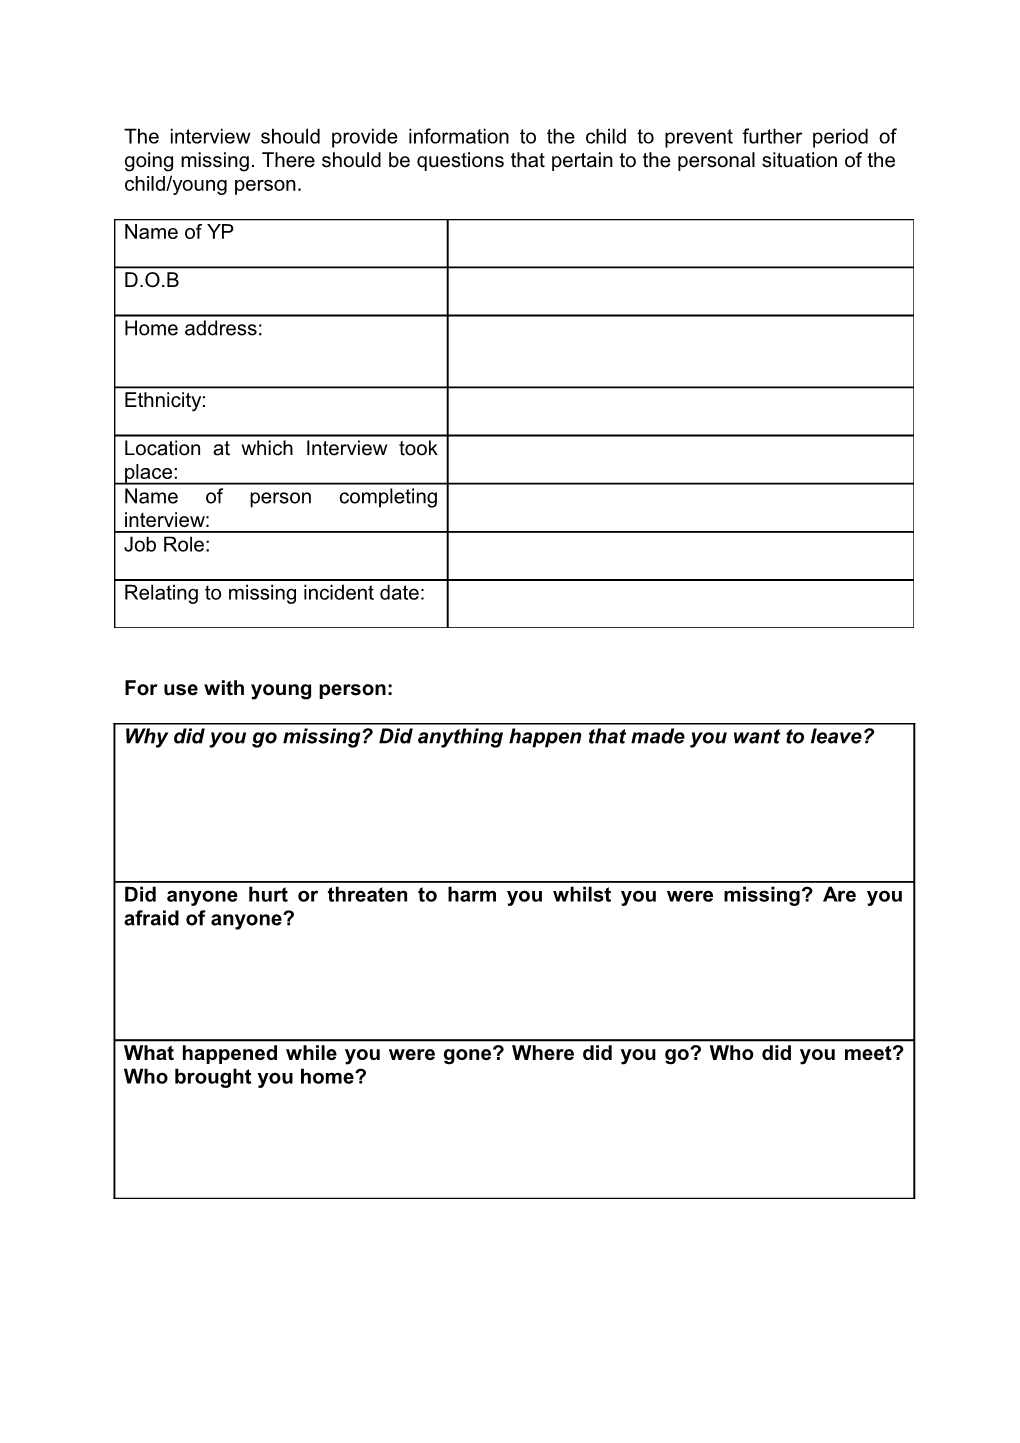 APPENDIX 2 RETURN INTERVIEW FORM and GUIDANCE: to Be Returned To